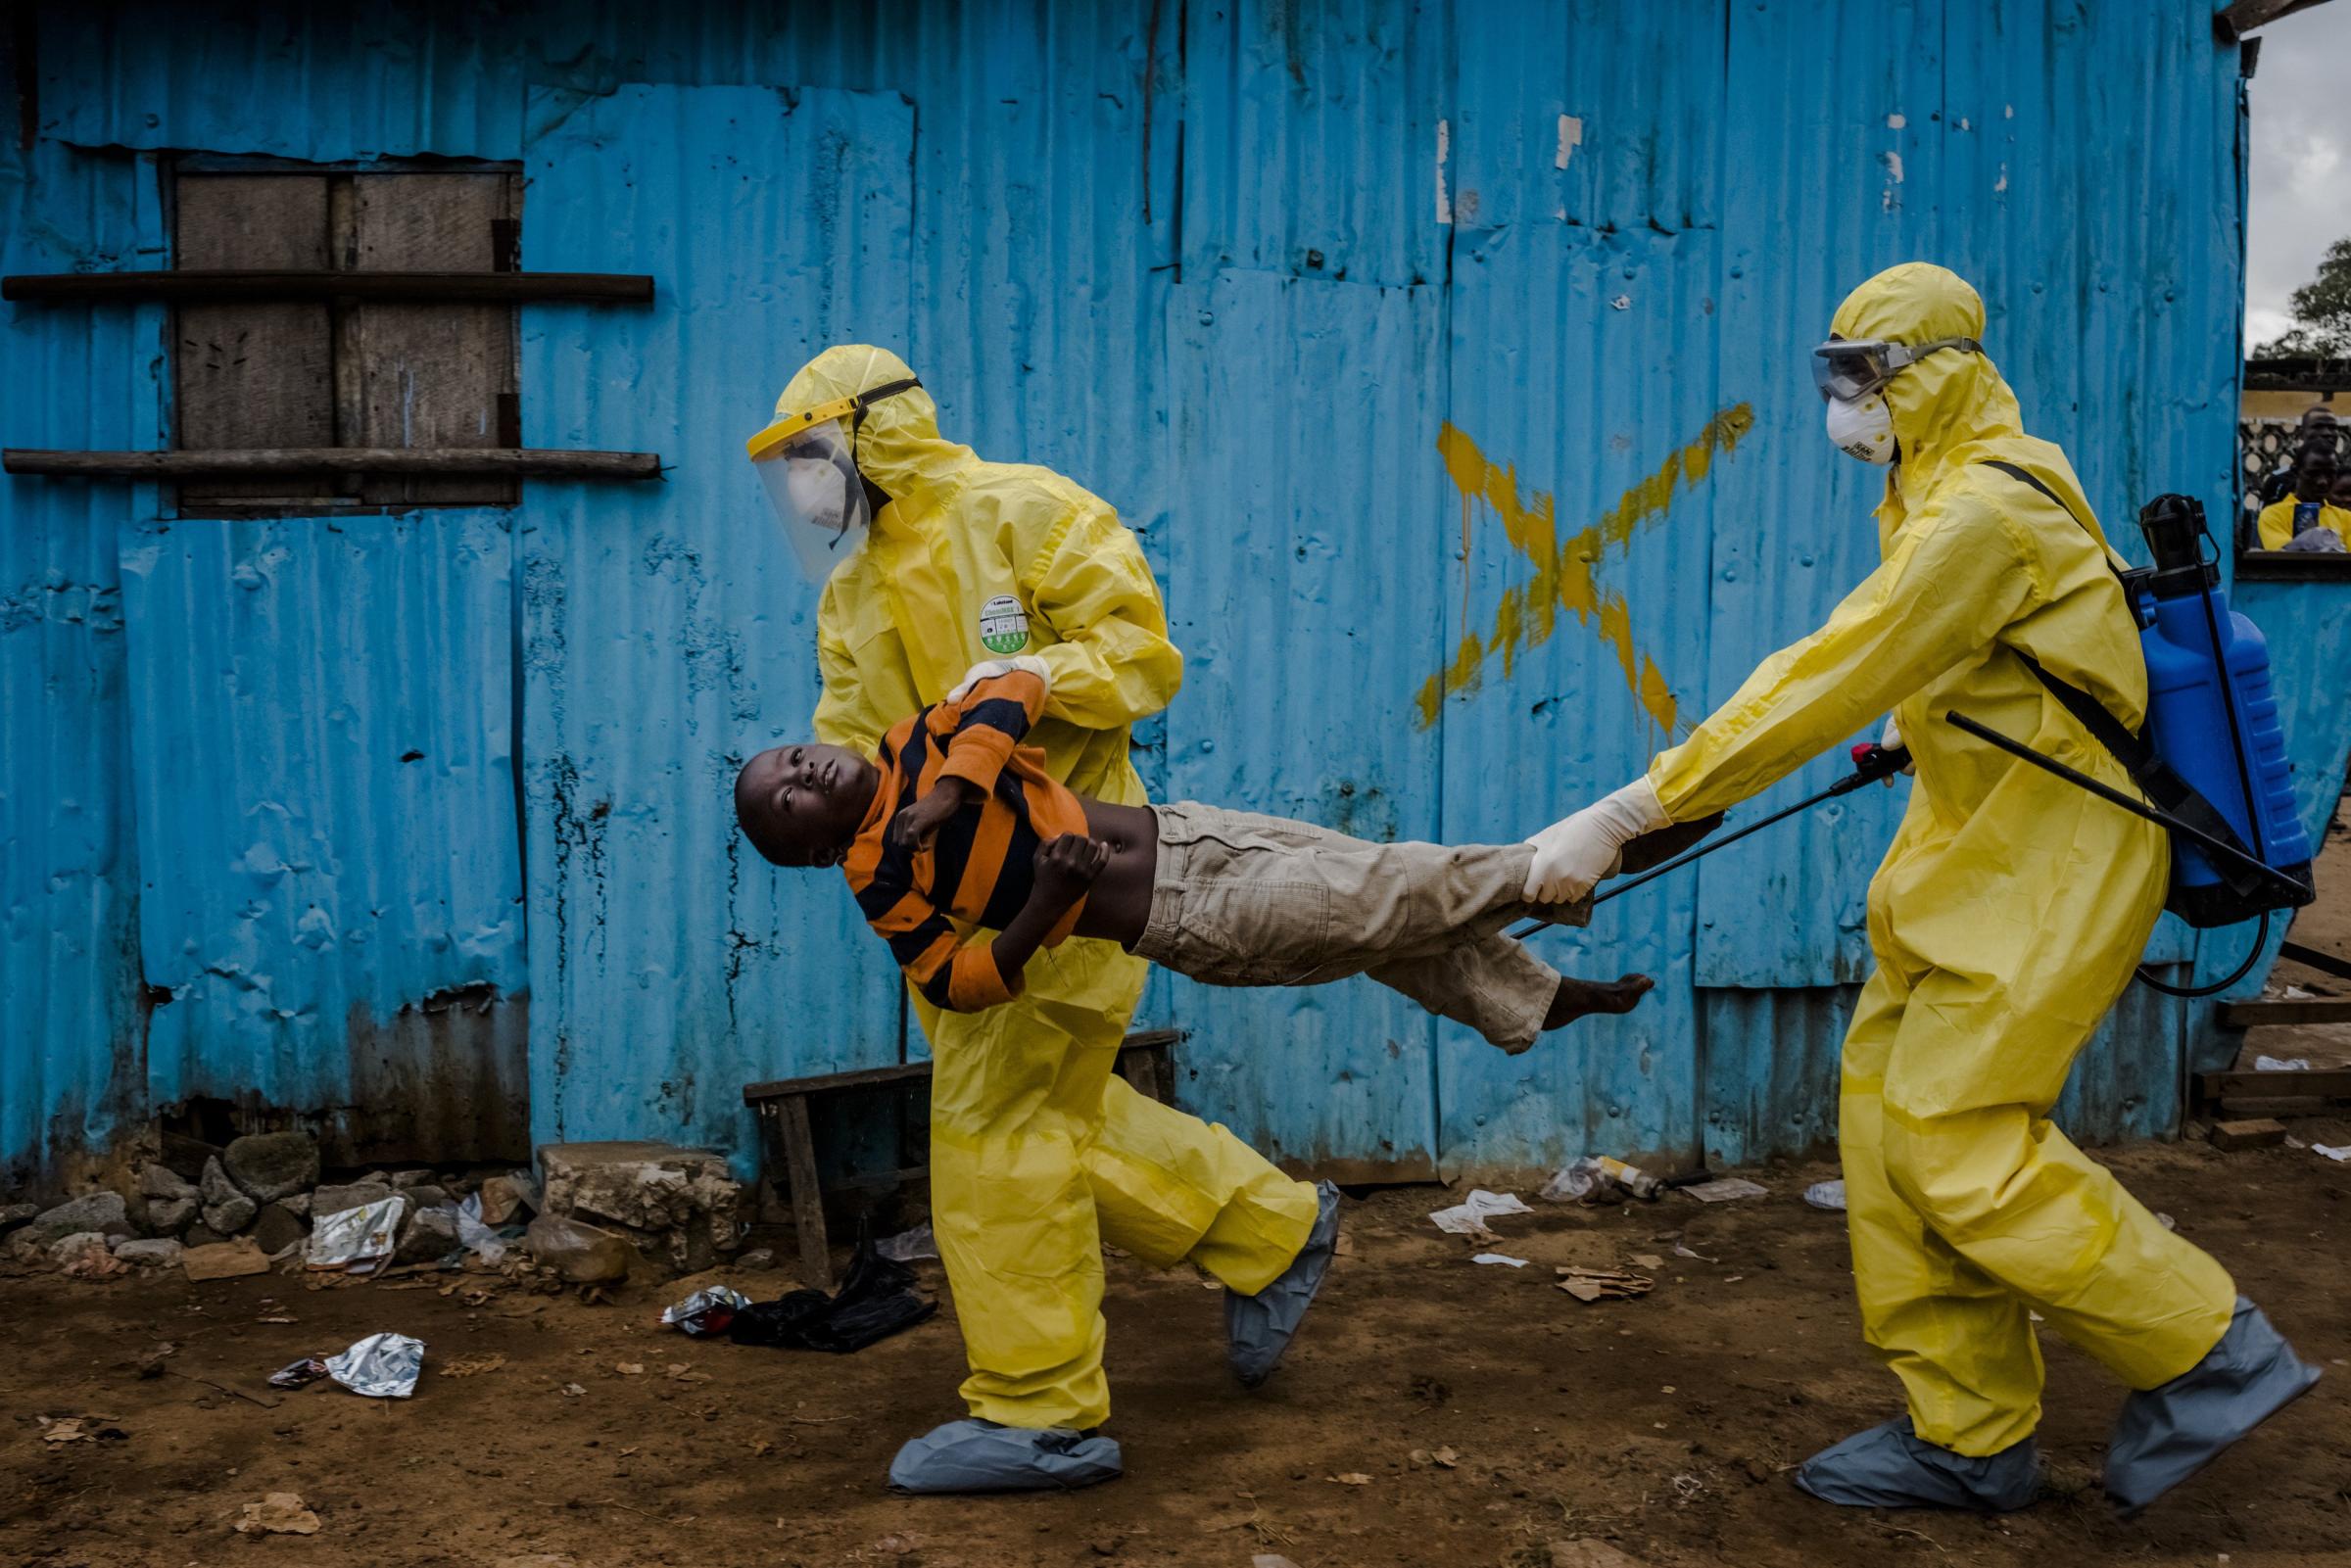 Medical staff carry James Dorbor, 8, suspected of having Ebola, into a treatment facility in Monrovia, Liberia on Sept. 5, 2014.